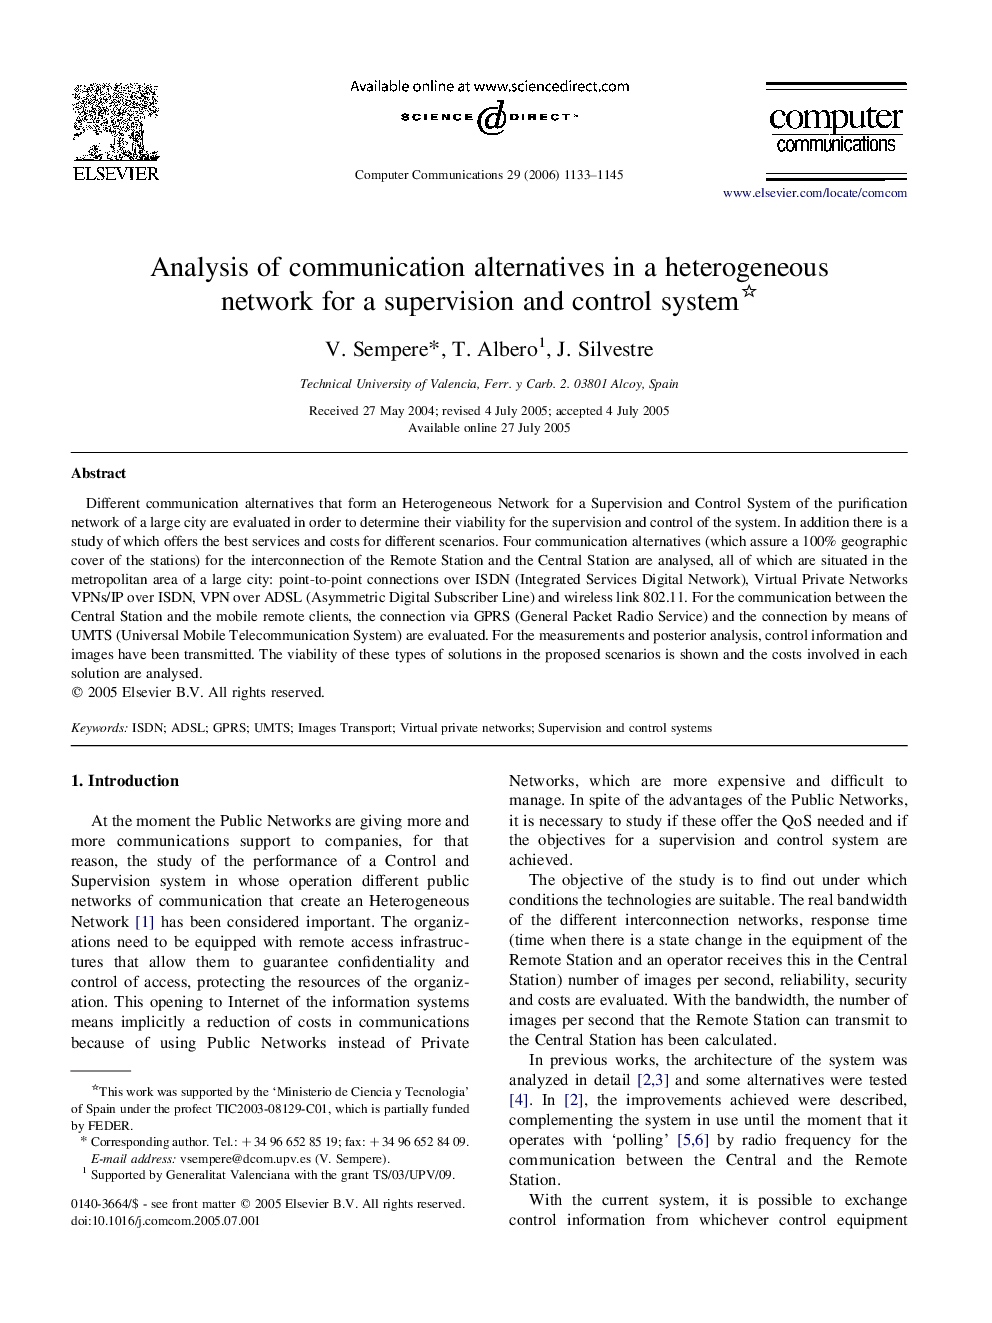 Analysis of communication alternatives in a heterogeneous network for a supervision and control system 